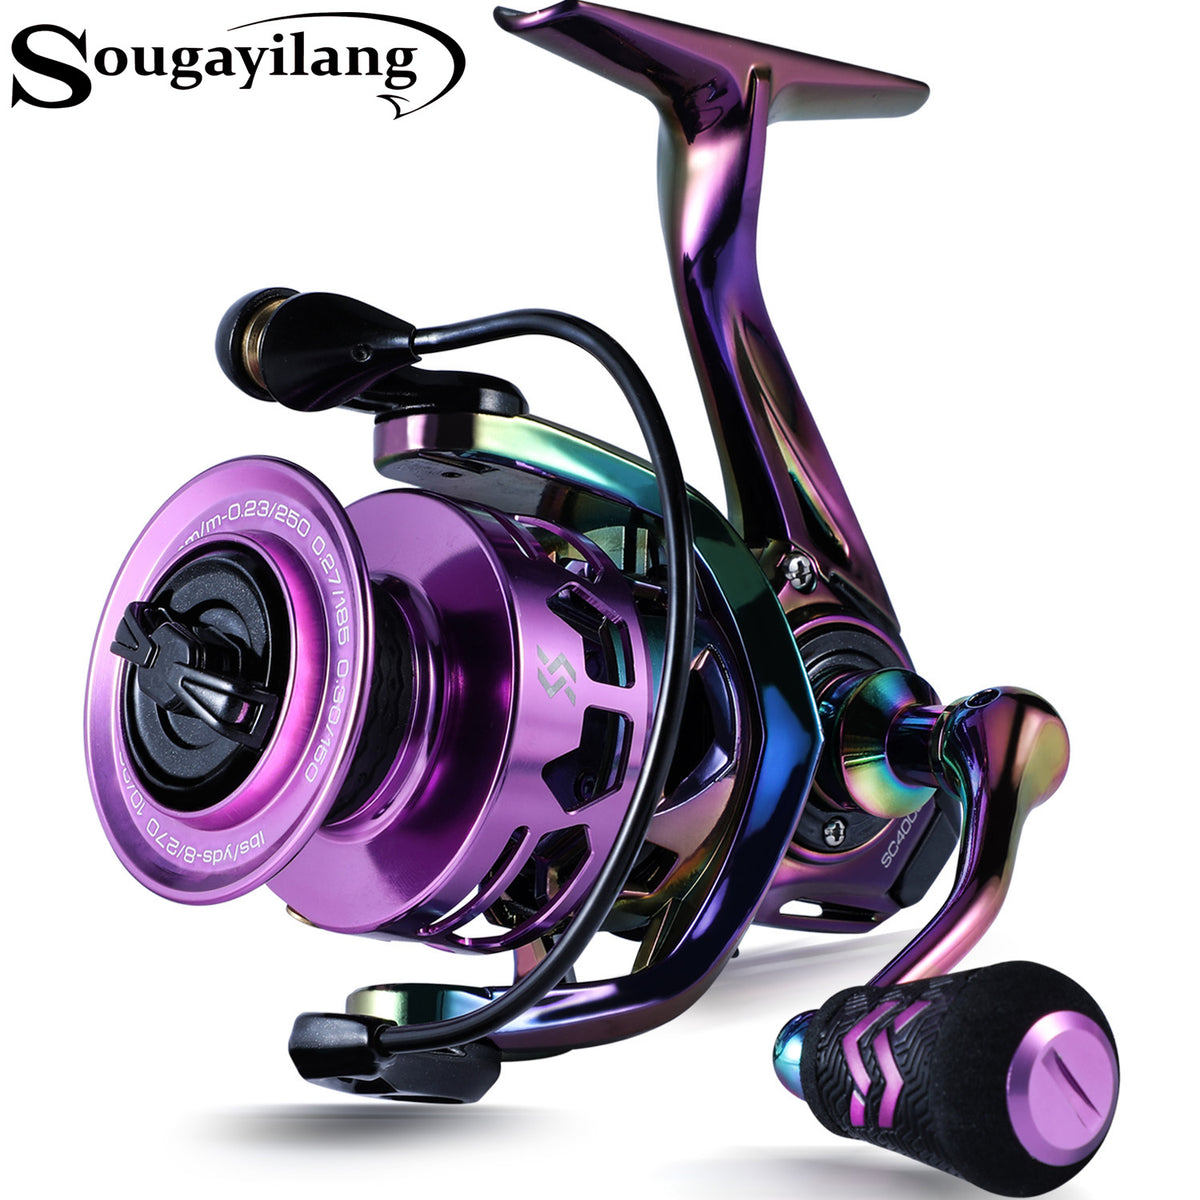 Sougayilang Fishing Reel, Colorful Ultralight Spinning Reels with Graphite  Frame 6.0:1 High Speed, Over 39 lbs Carbon Drag for Saltwater or Freshwater